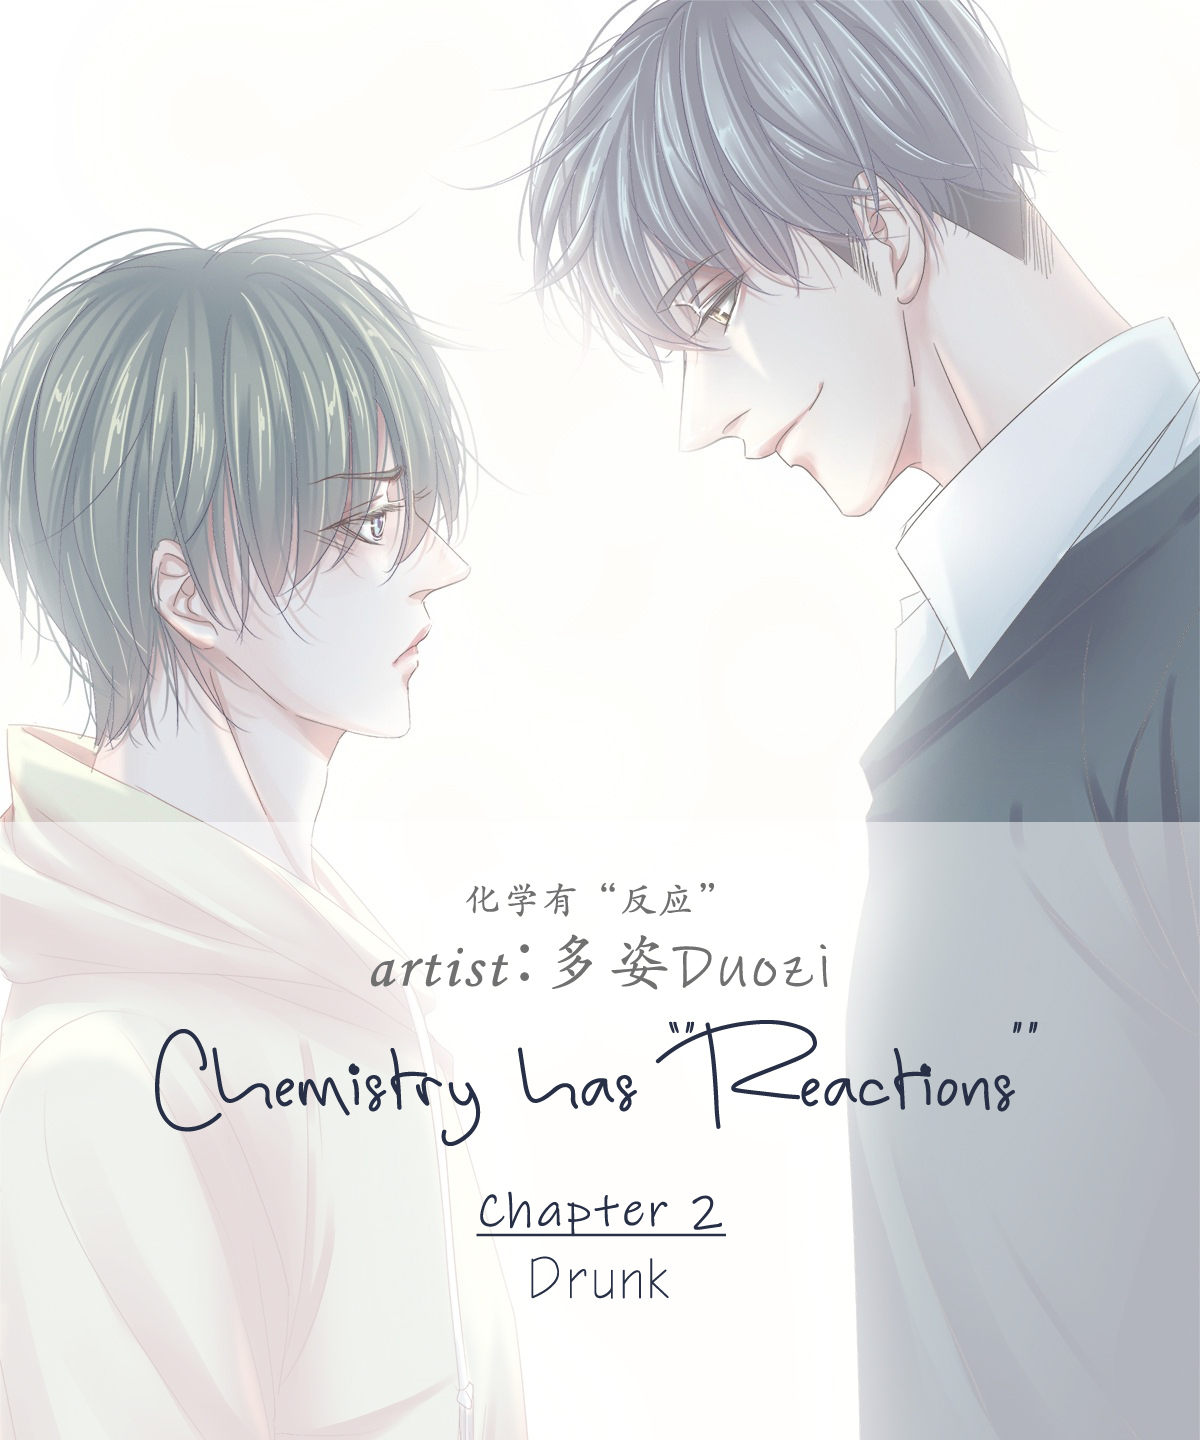 Chemistry has "Reactions" Vol. 1 Ch. 2